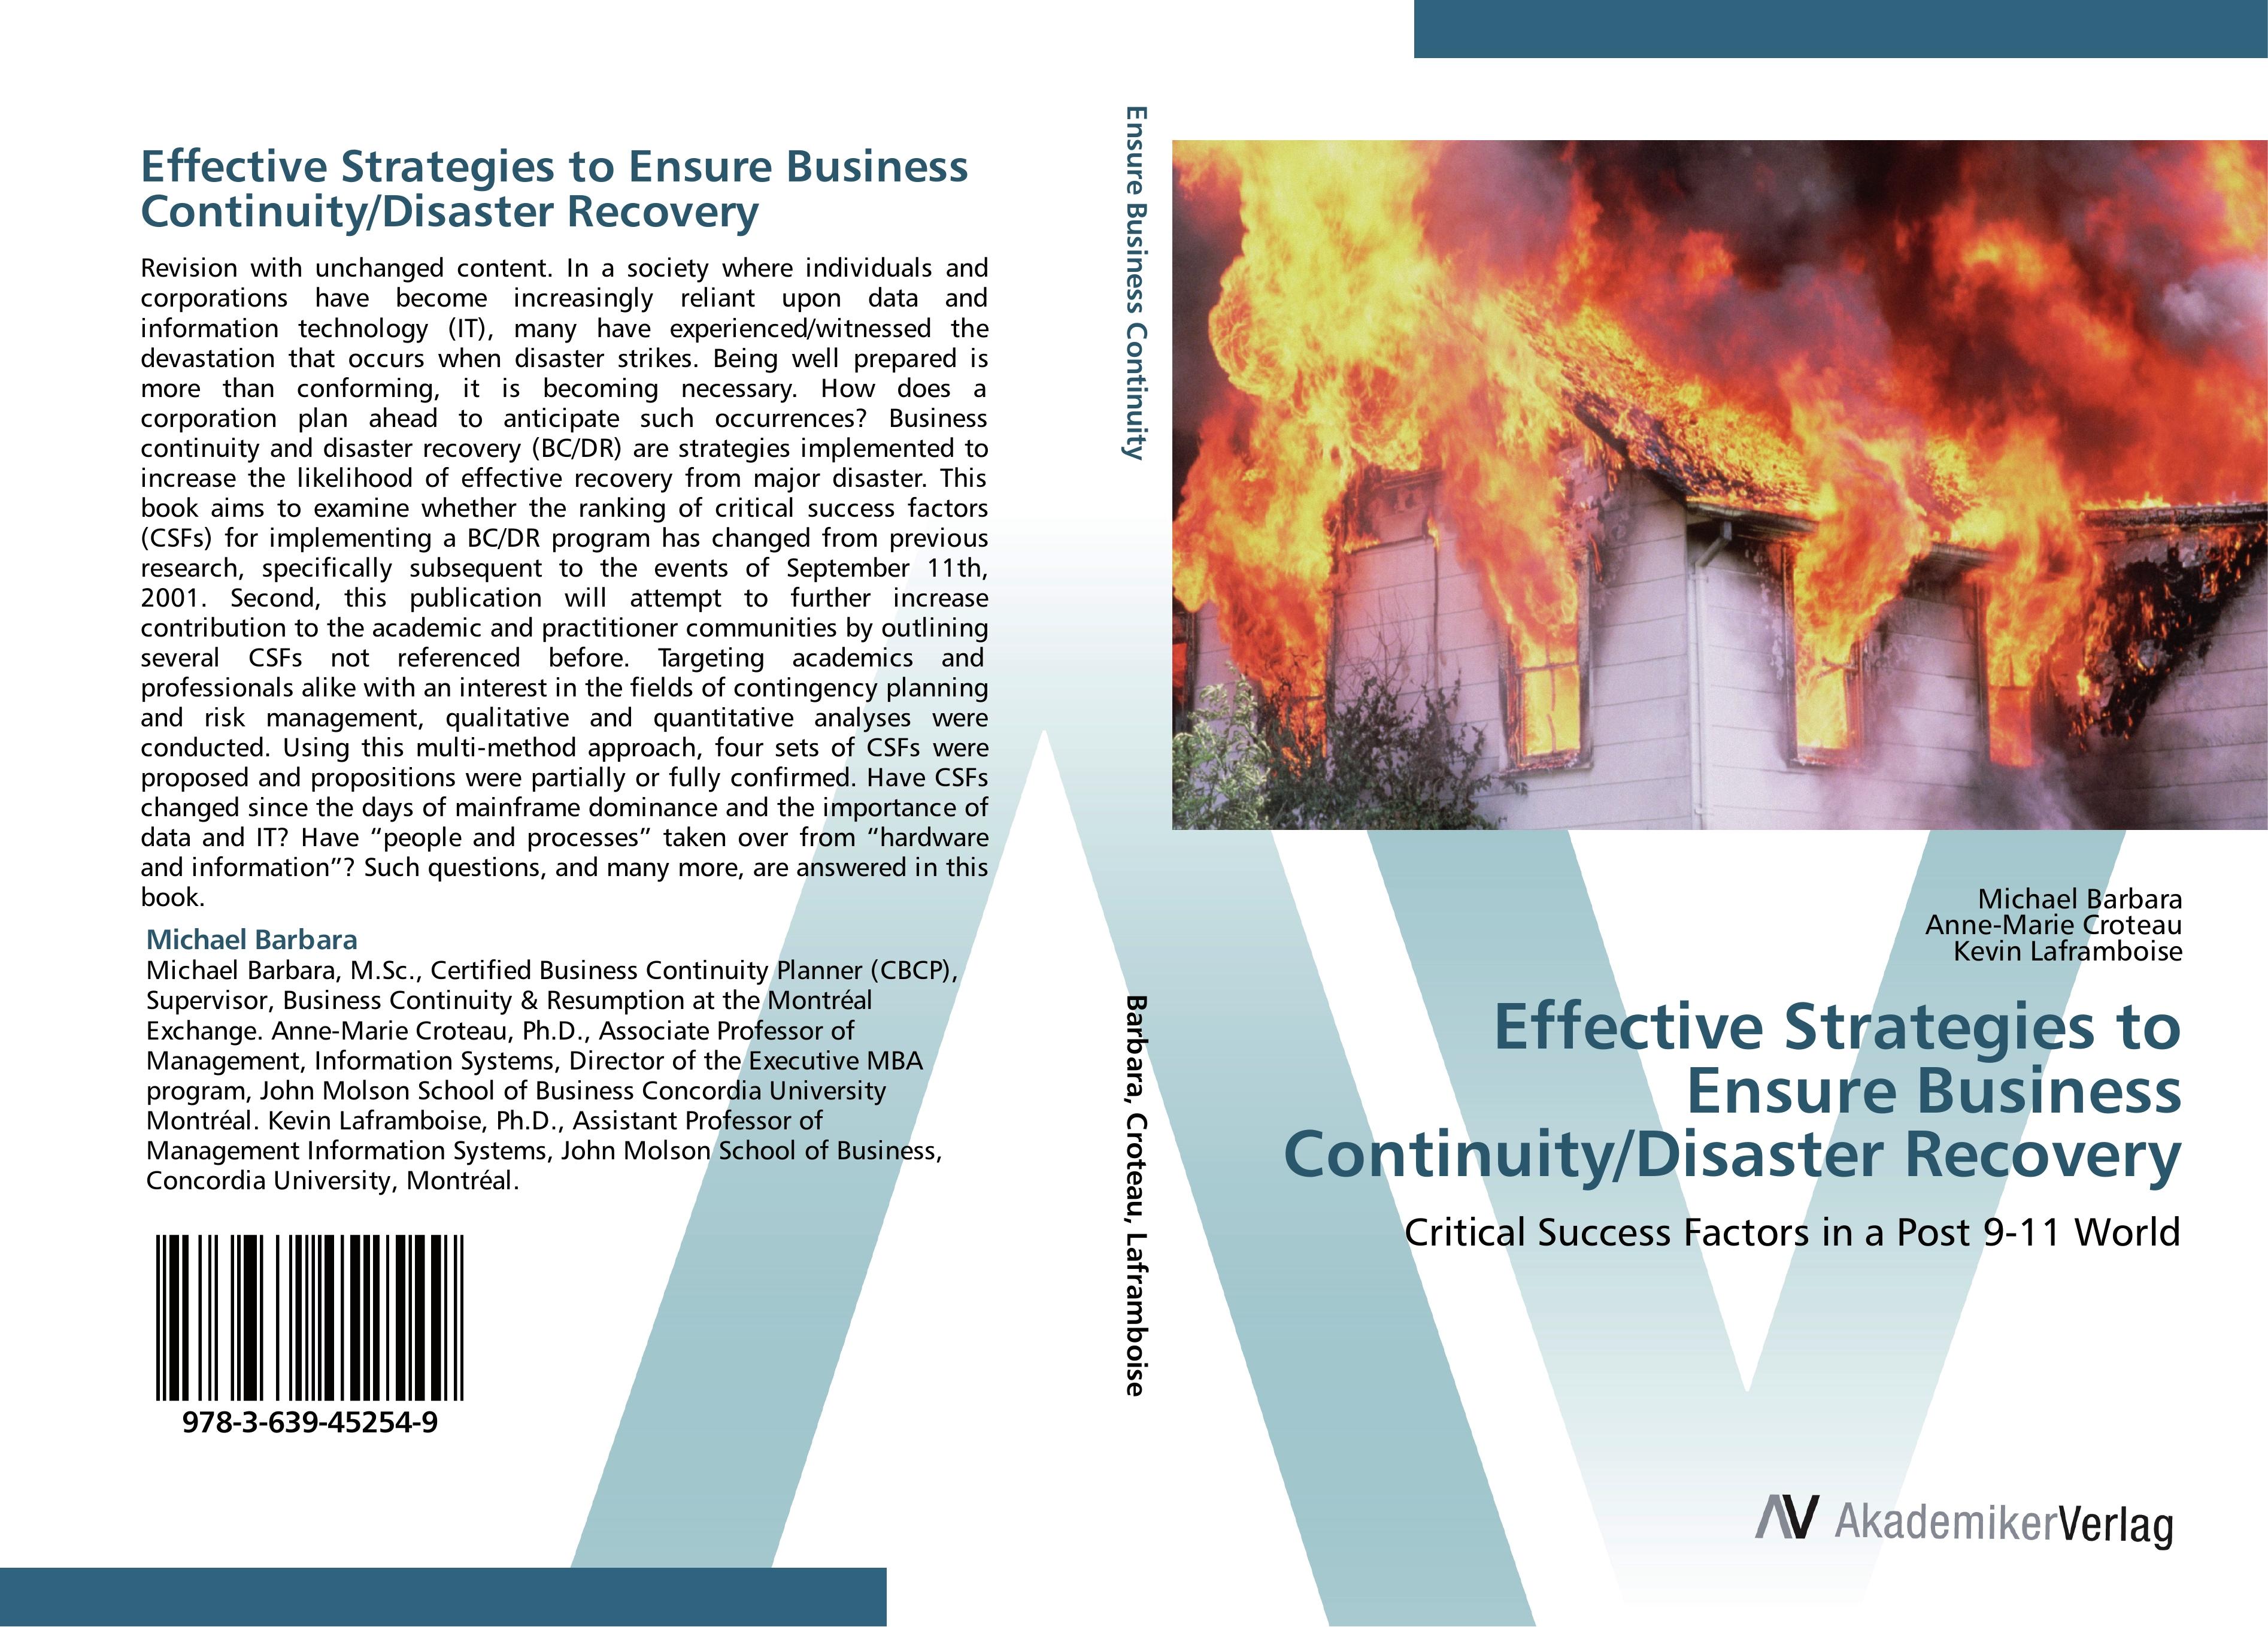 Effective Strategies to Ensure Business Continuity/Disaster Recovery - Michael Barbara Anne-Marie Croteau Kevin Laframboise